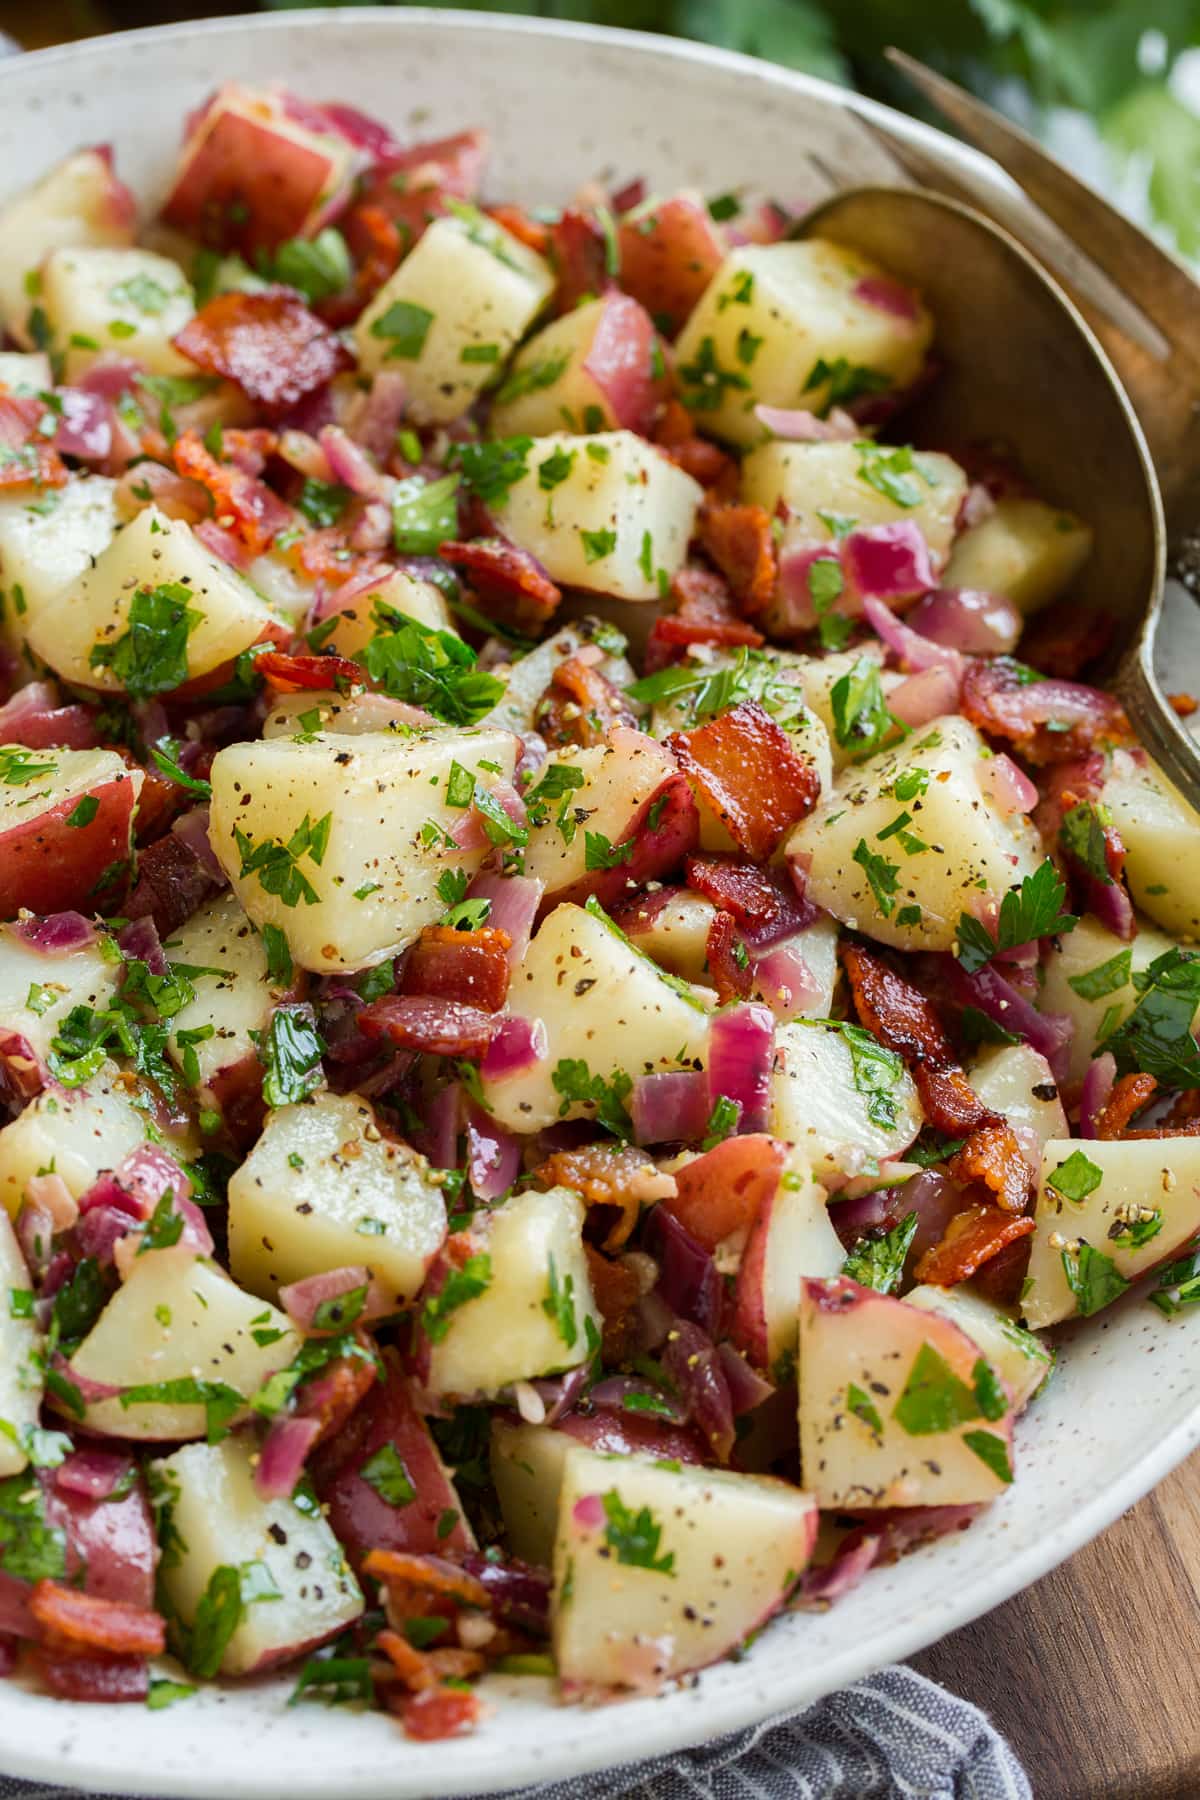 Close up image of german potato salad with red potatoes, parsley, bacon and onions in white ceramic serving bowl.